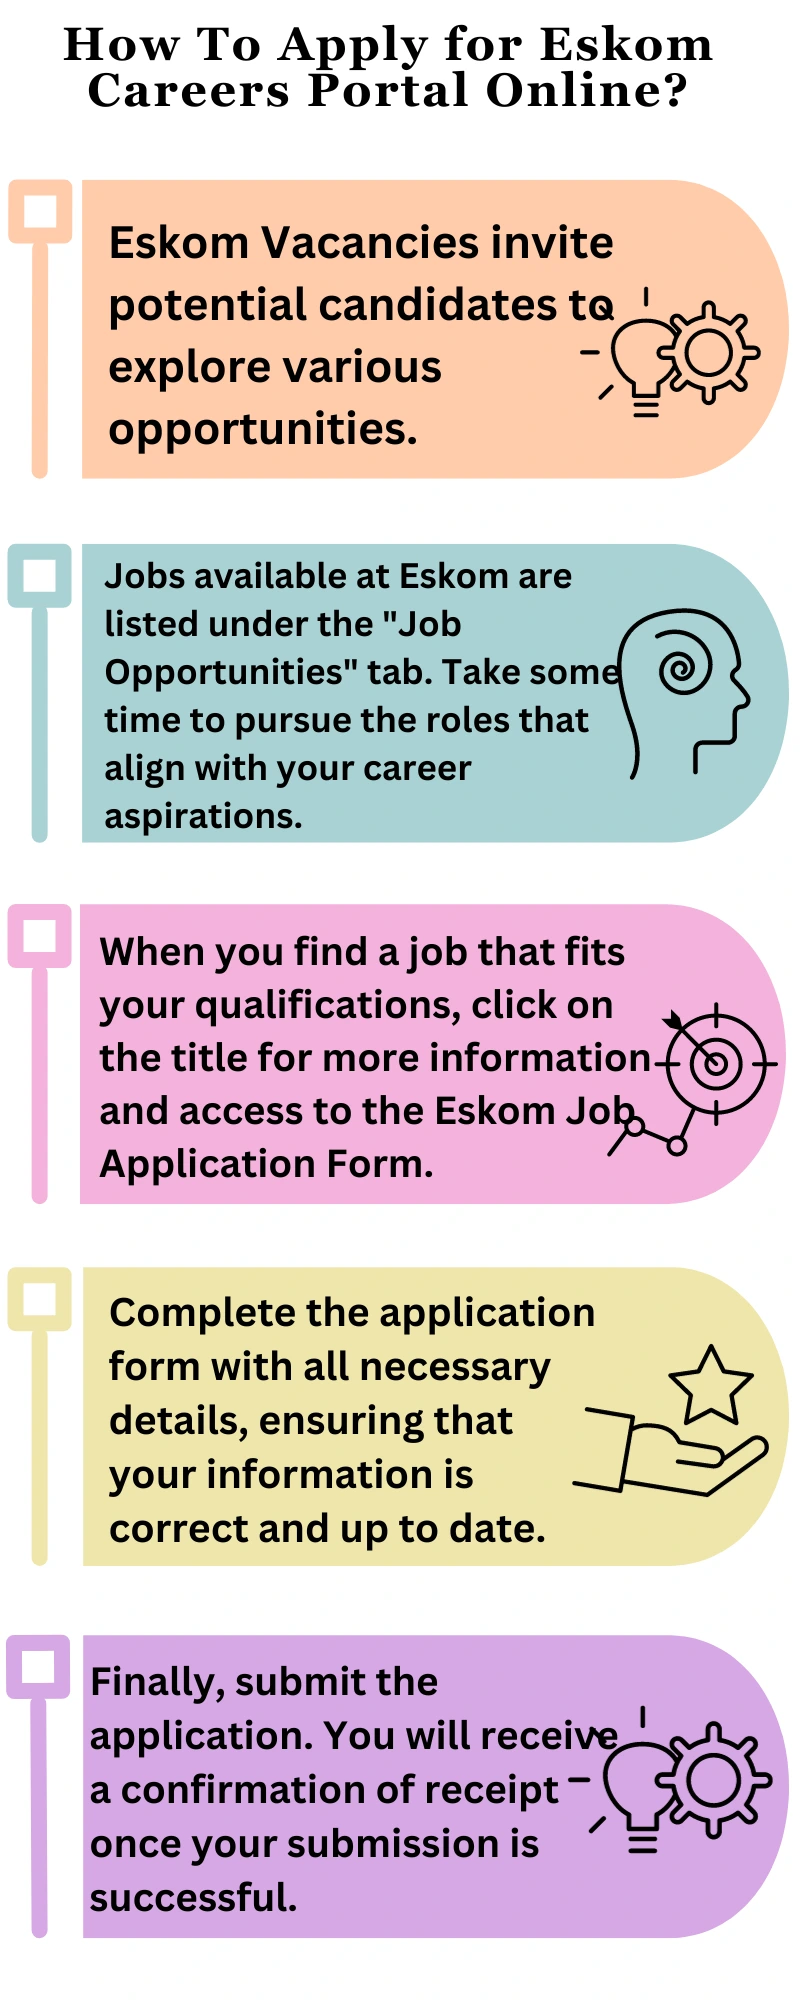 How To Apply for Eskom Careers Portal Online?